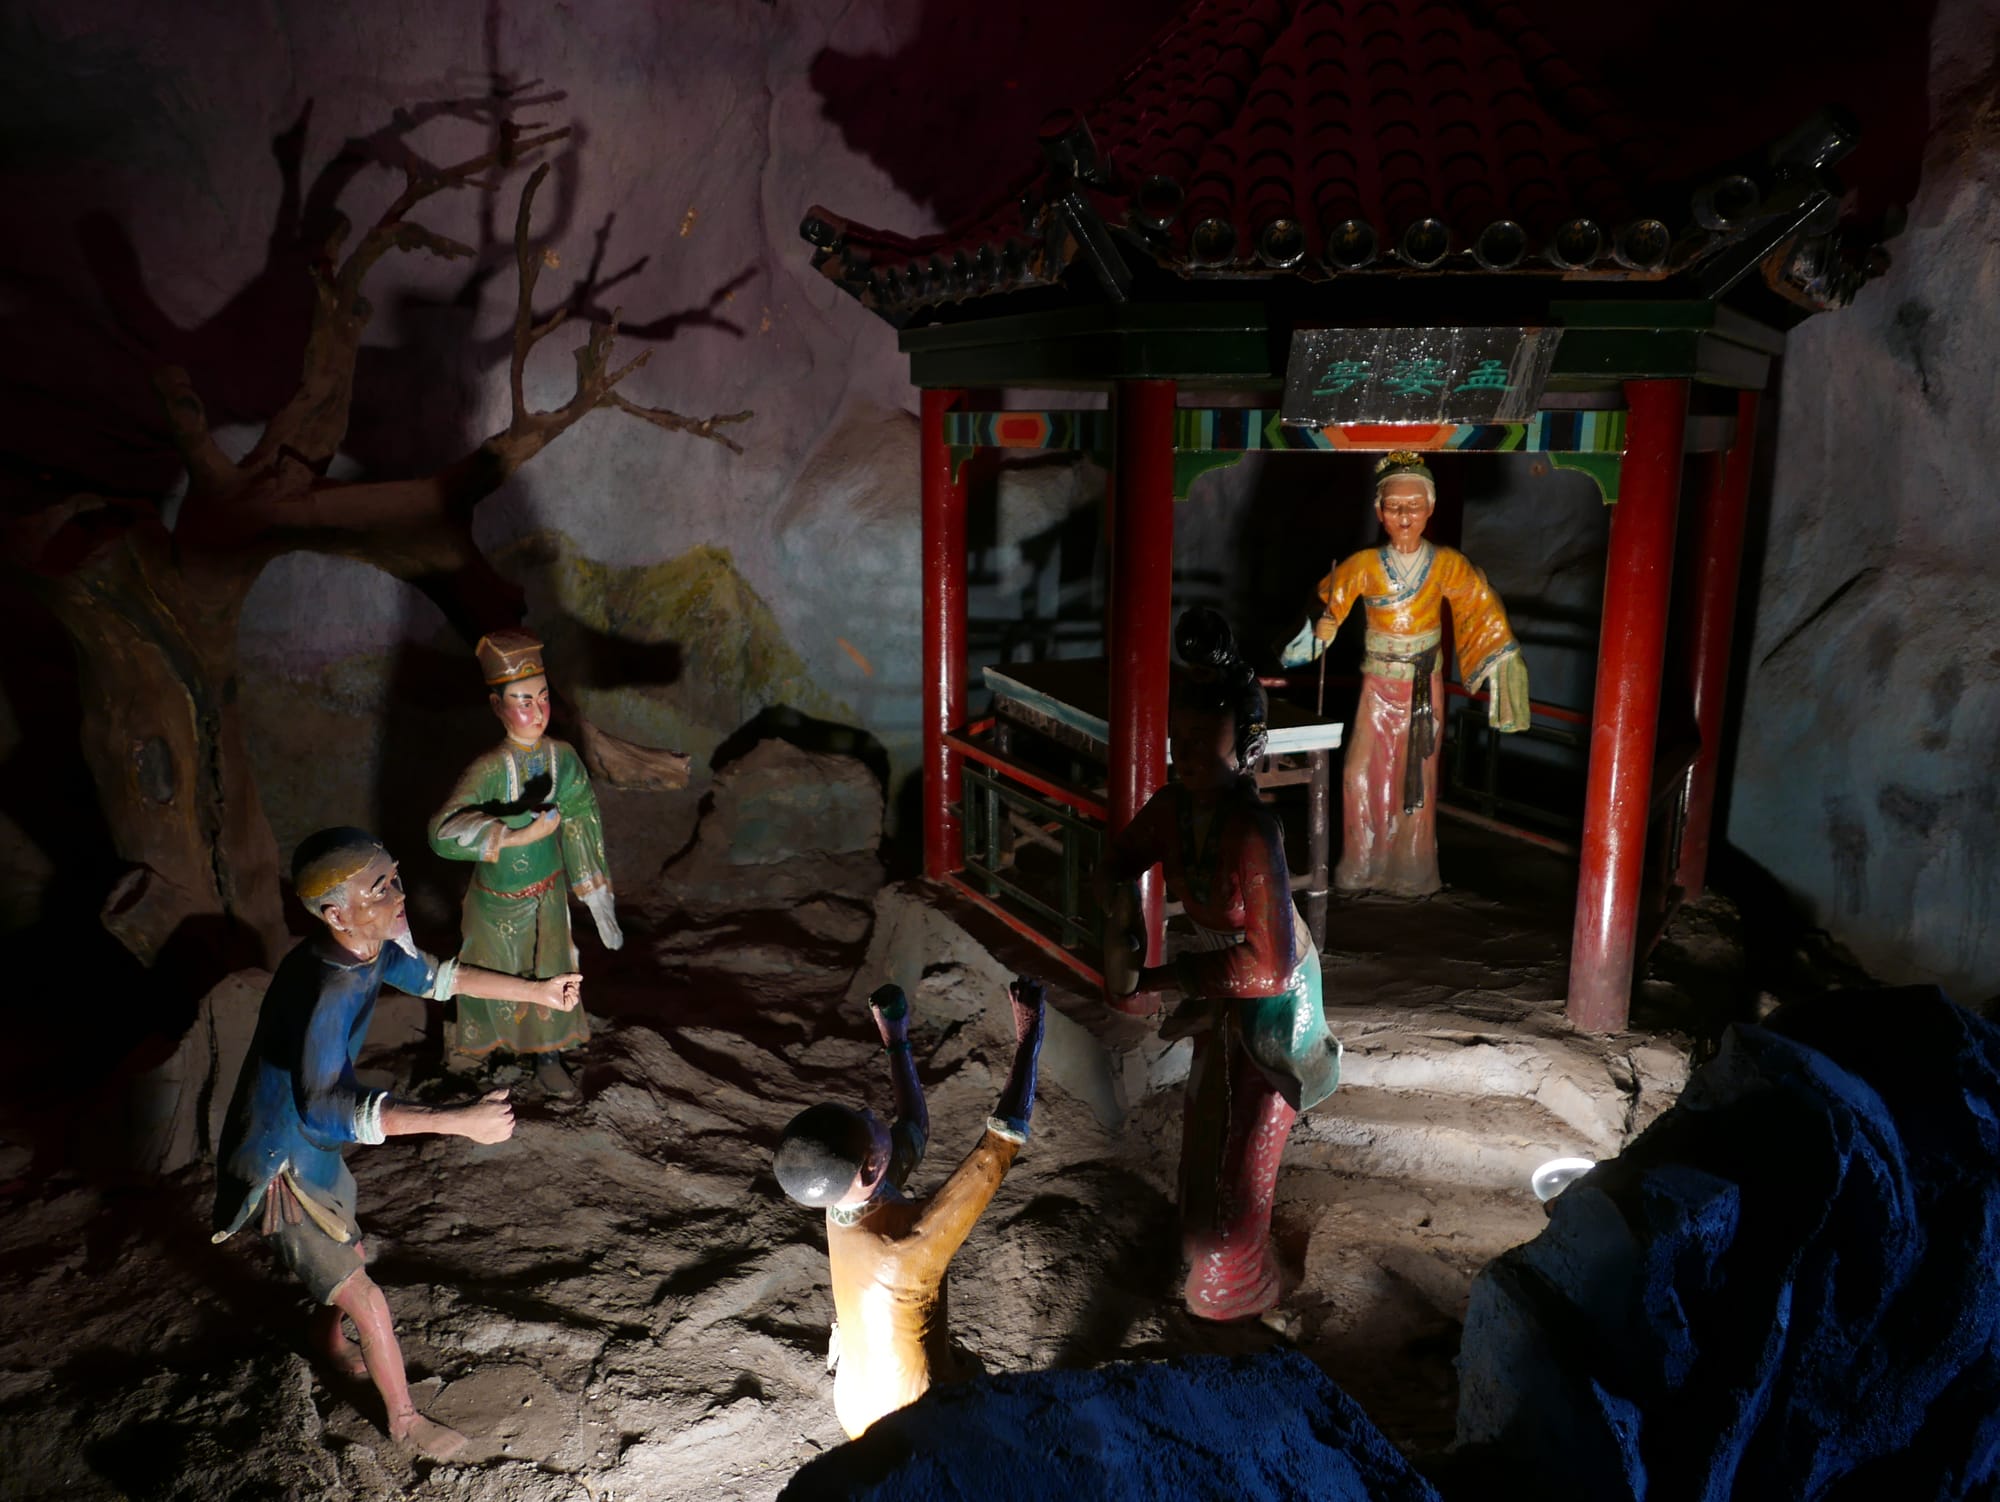 Photo by Author — Men Po and the magic tea — the Tenth Court of Hell (King Zhuanlun) — 10 Courts of Hell, Haw Par Villa, Singapore